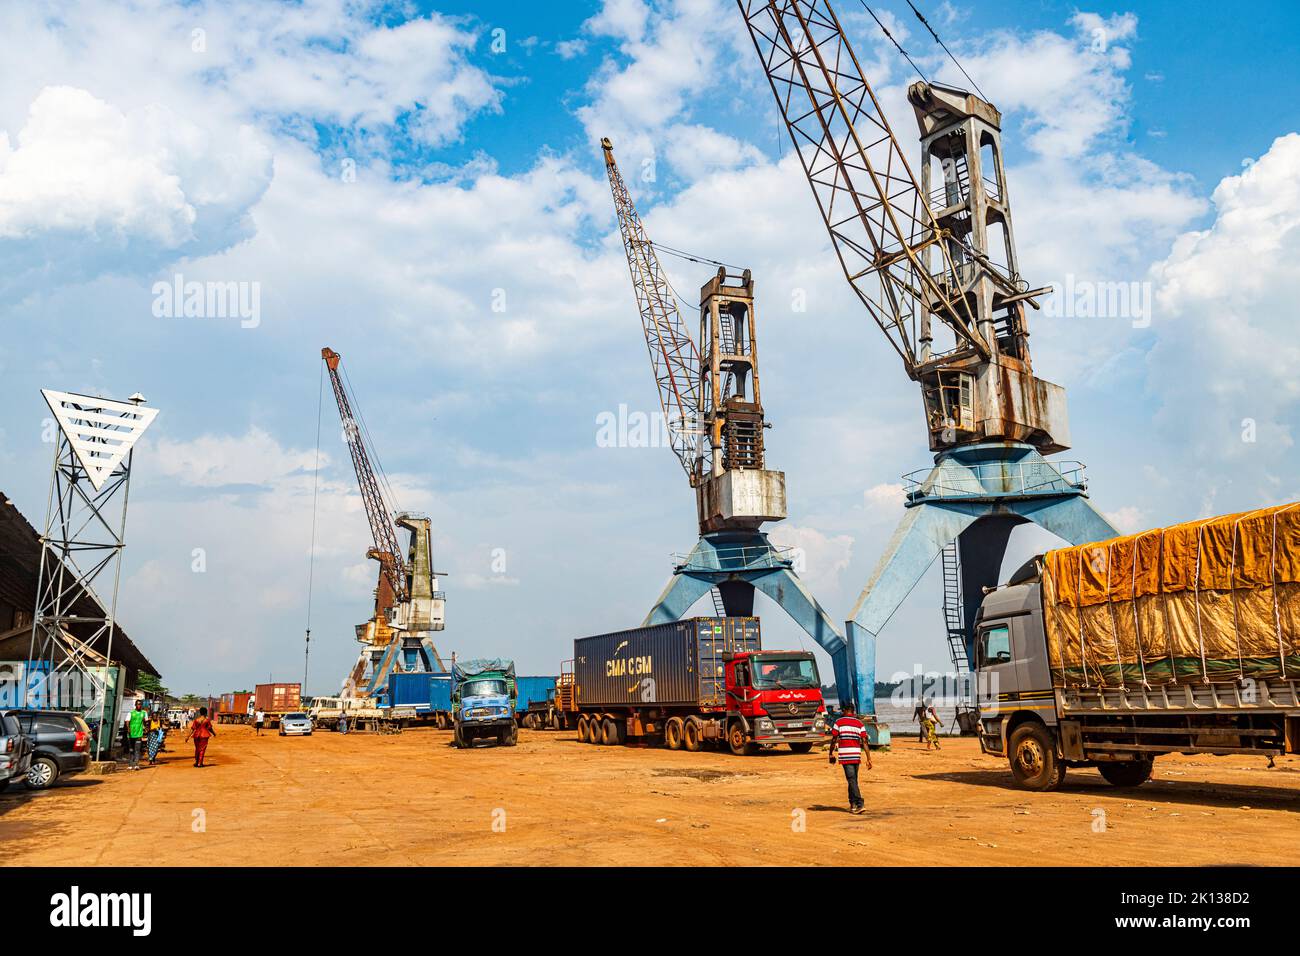 Old cranes in the Port of Kisangani, Democratic Republic of the Congo, Africa Stock Photo